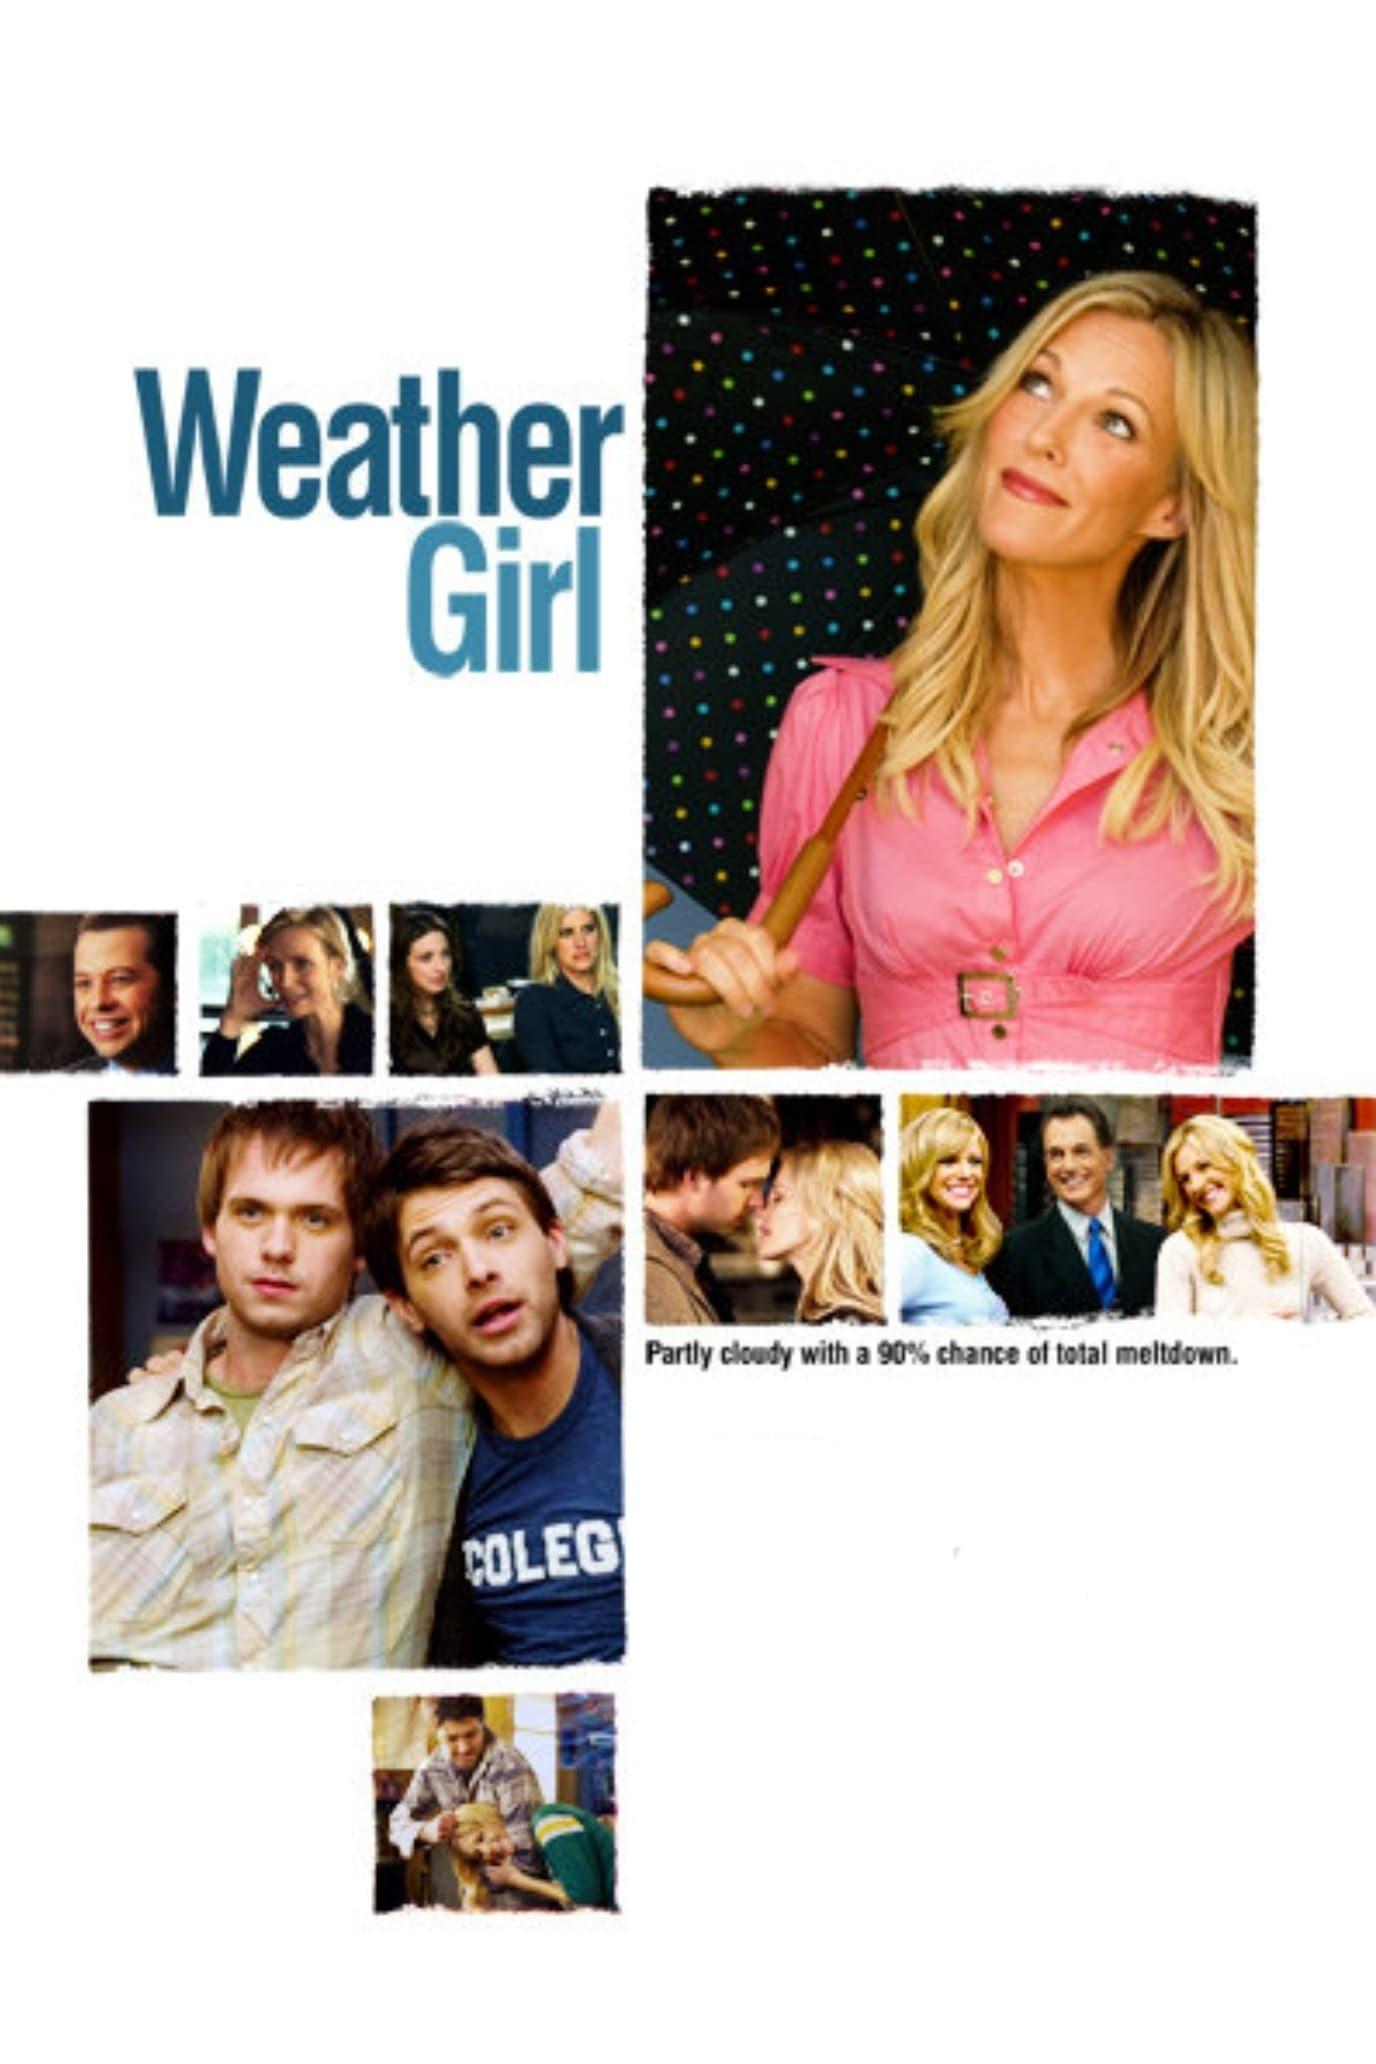 Weather Girl poster